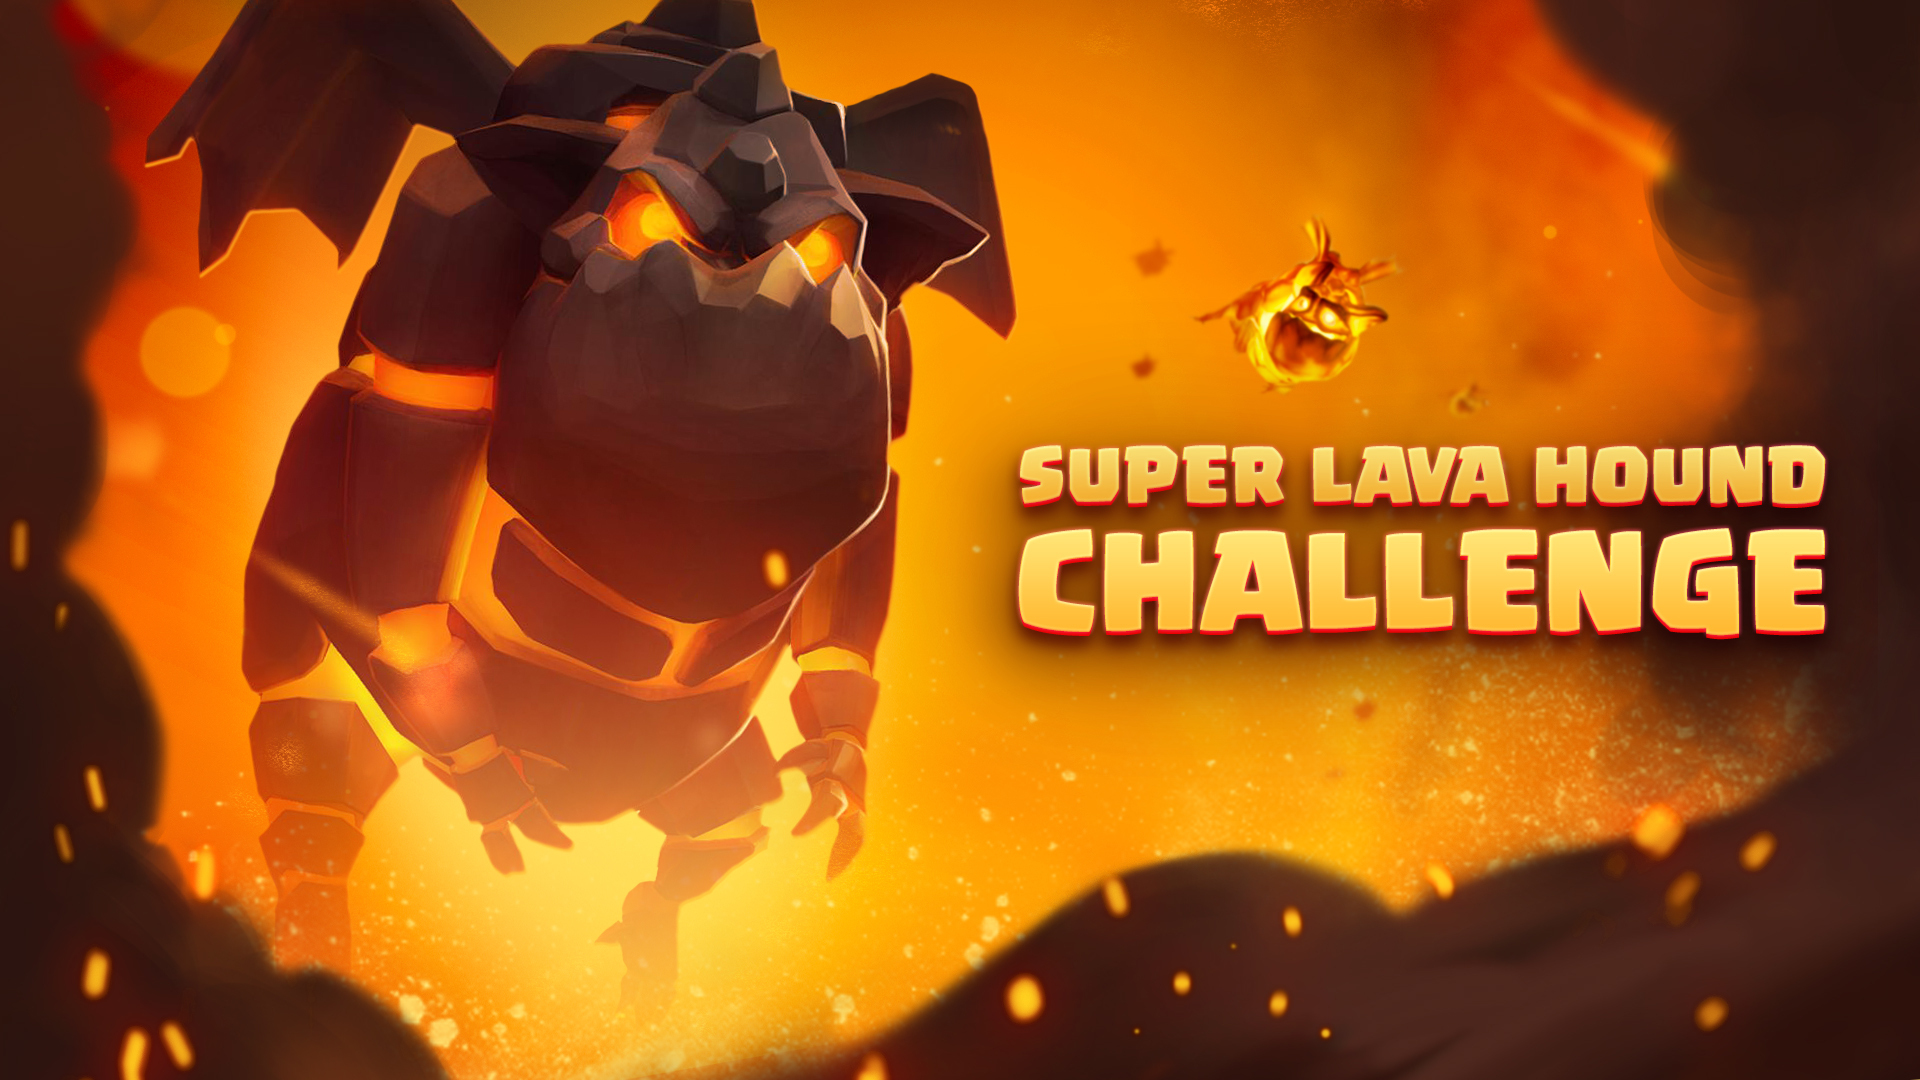 Clash Royale on X: "It's big, it's scary and it EXPLODES! 💥 Play in the  brand new Super Lava Hound Challenge this week and wreak havoc in the  Arena! 🌋 https://t.co/87TluEWGfZ" /